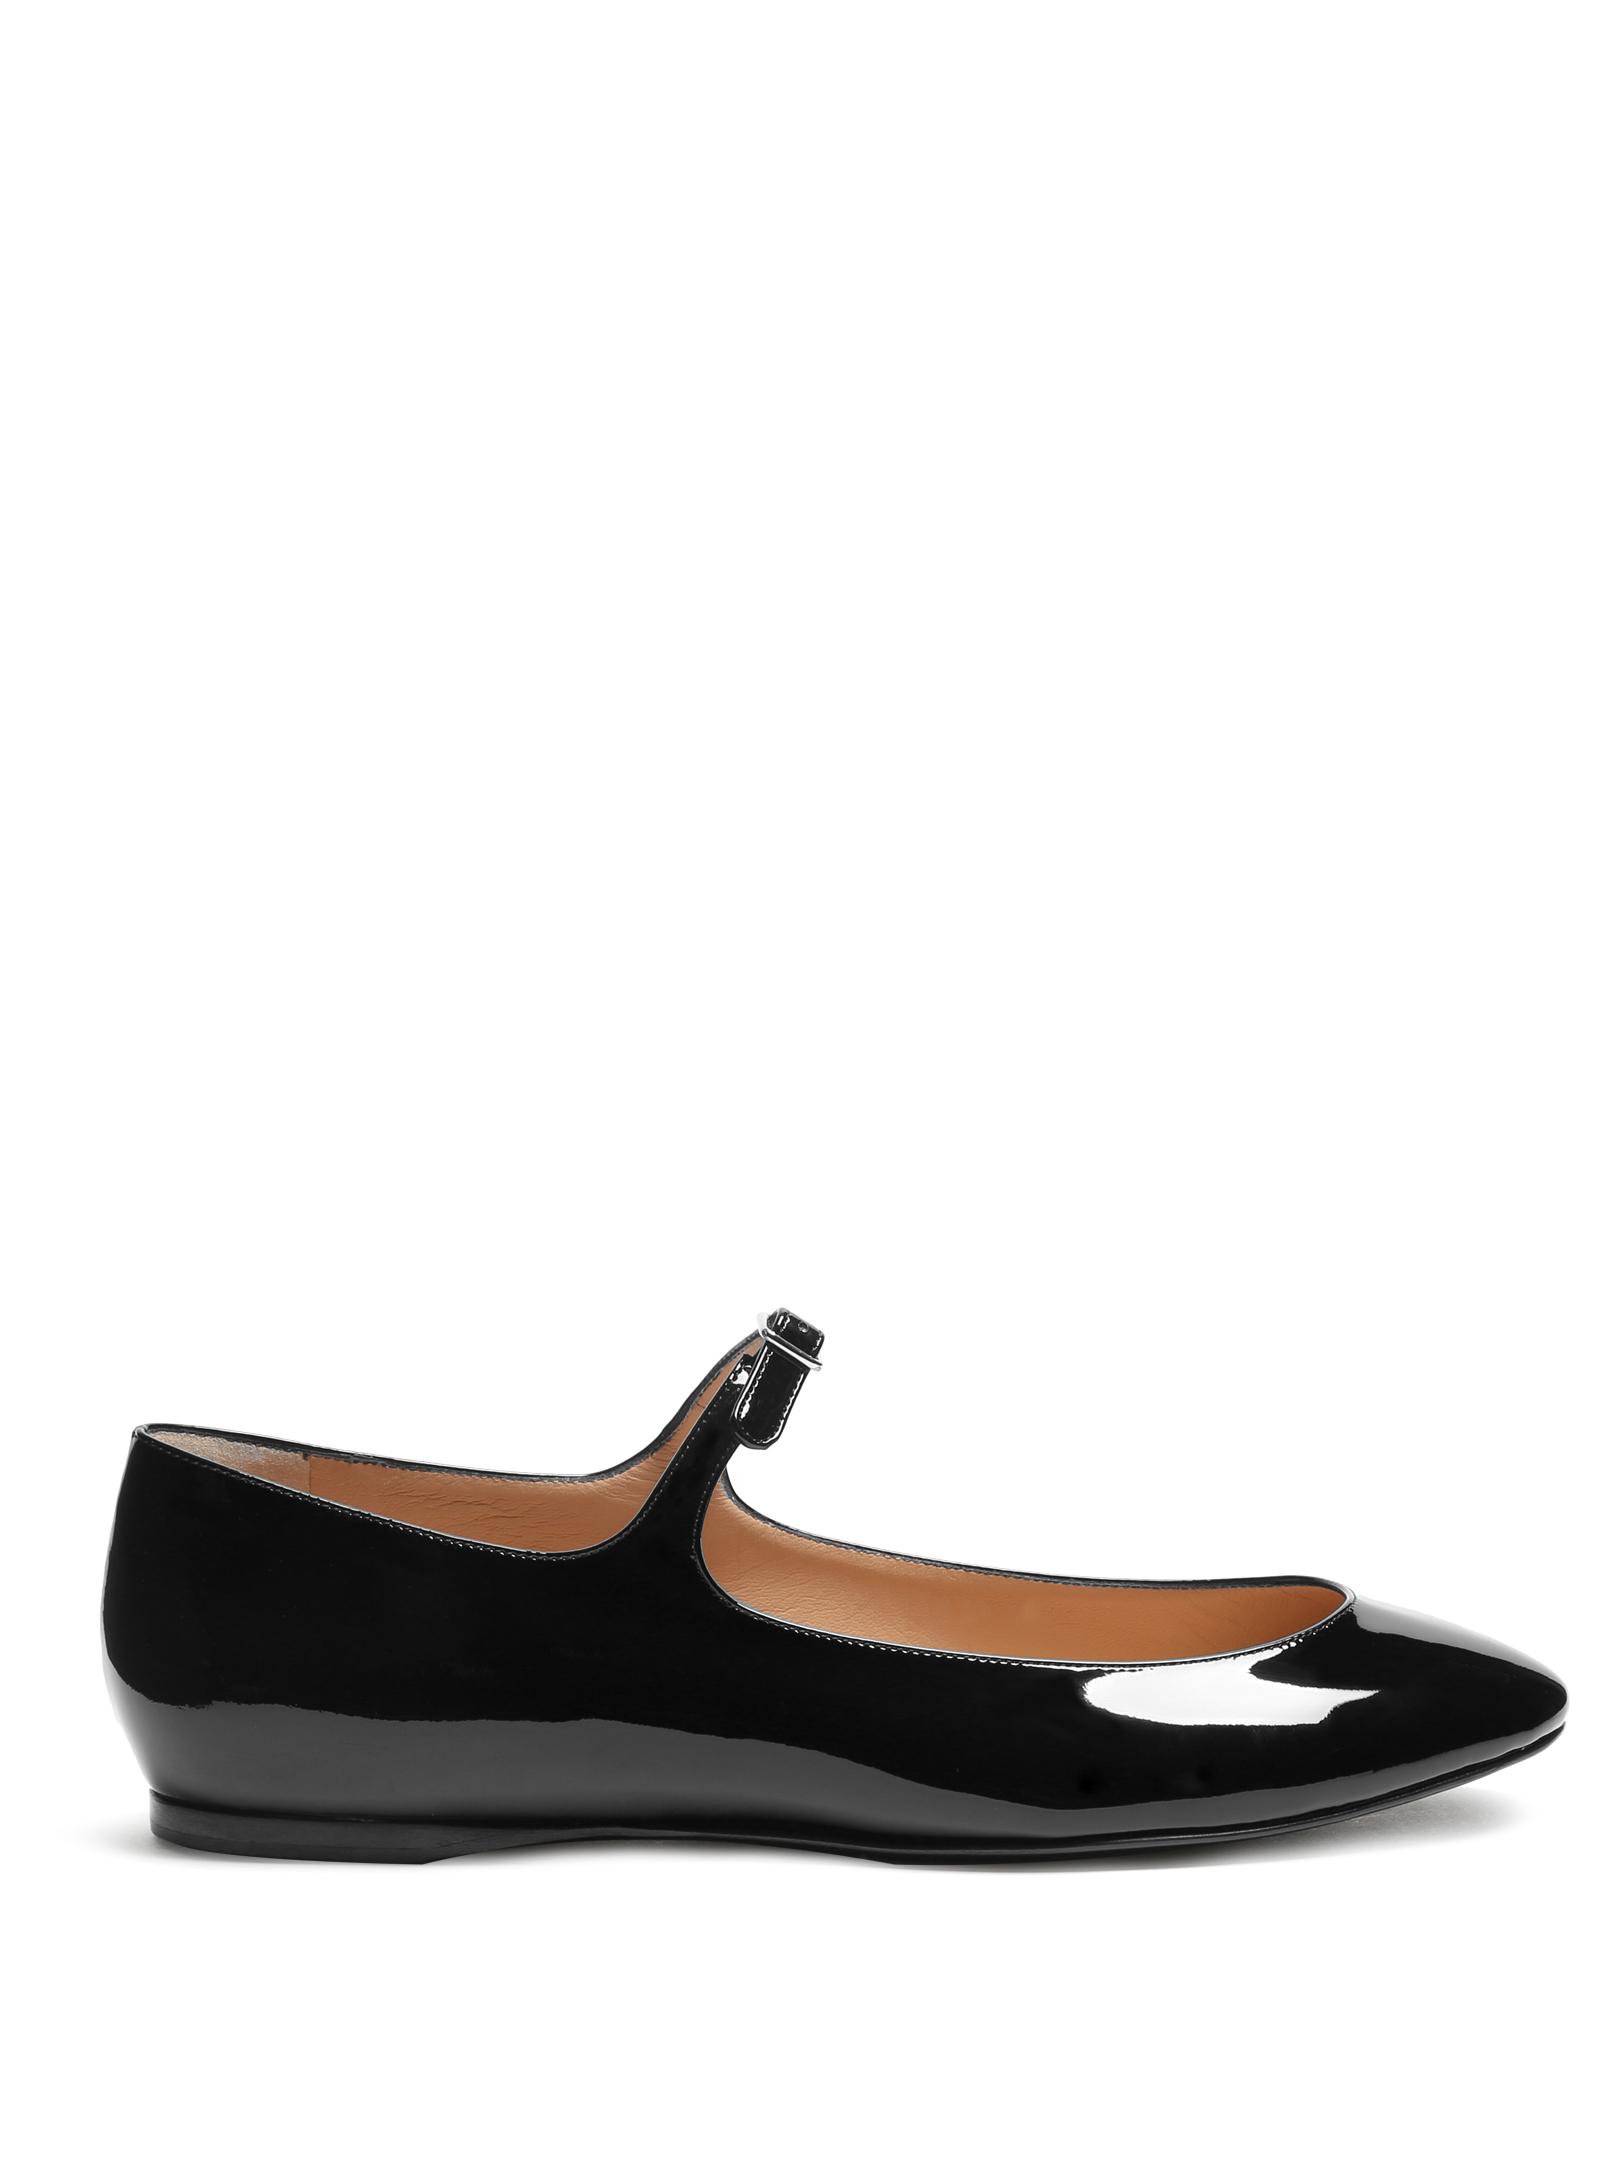 Acne Studios Jane Patent-leather Ballet Flats in Black | Lyst